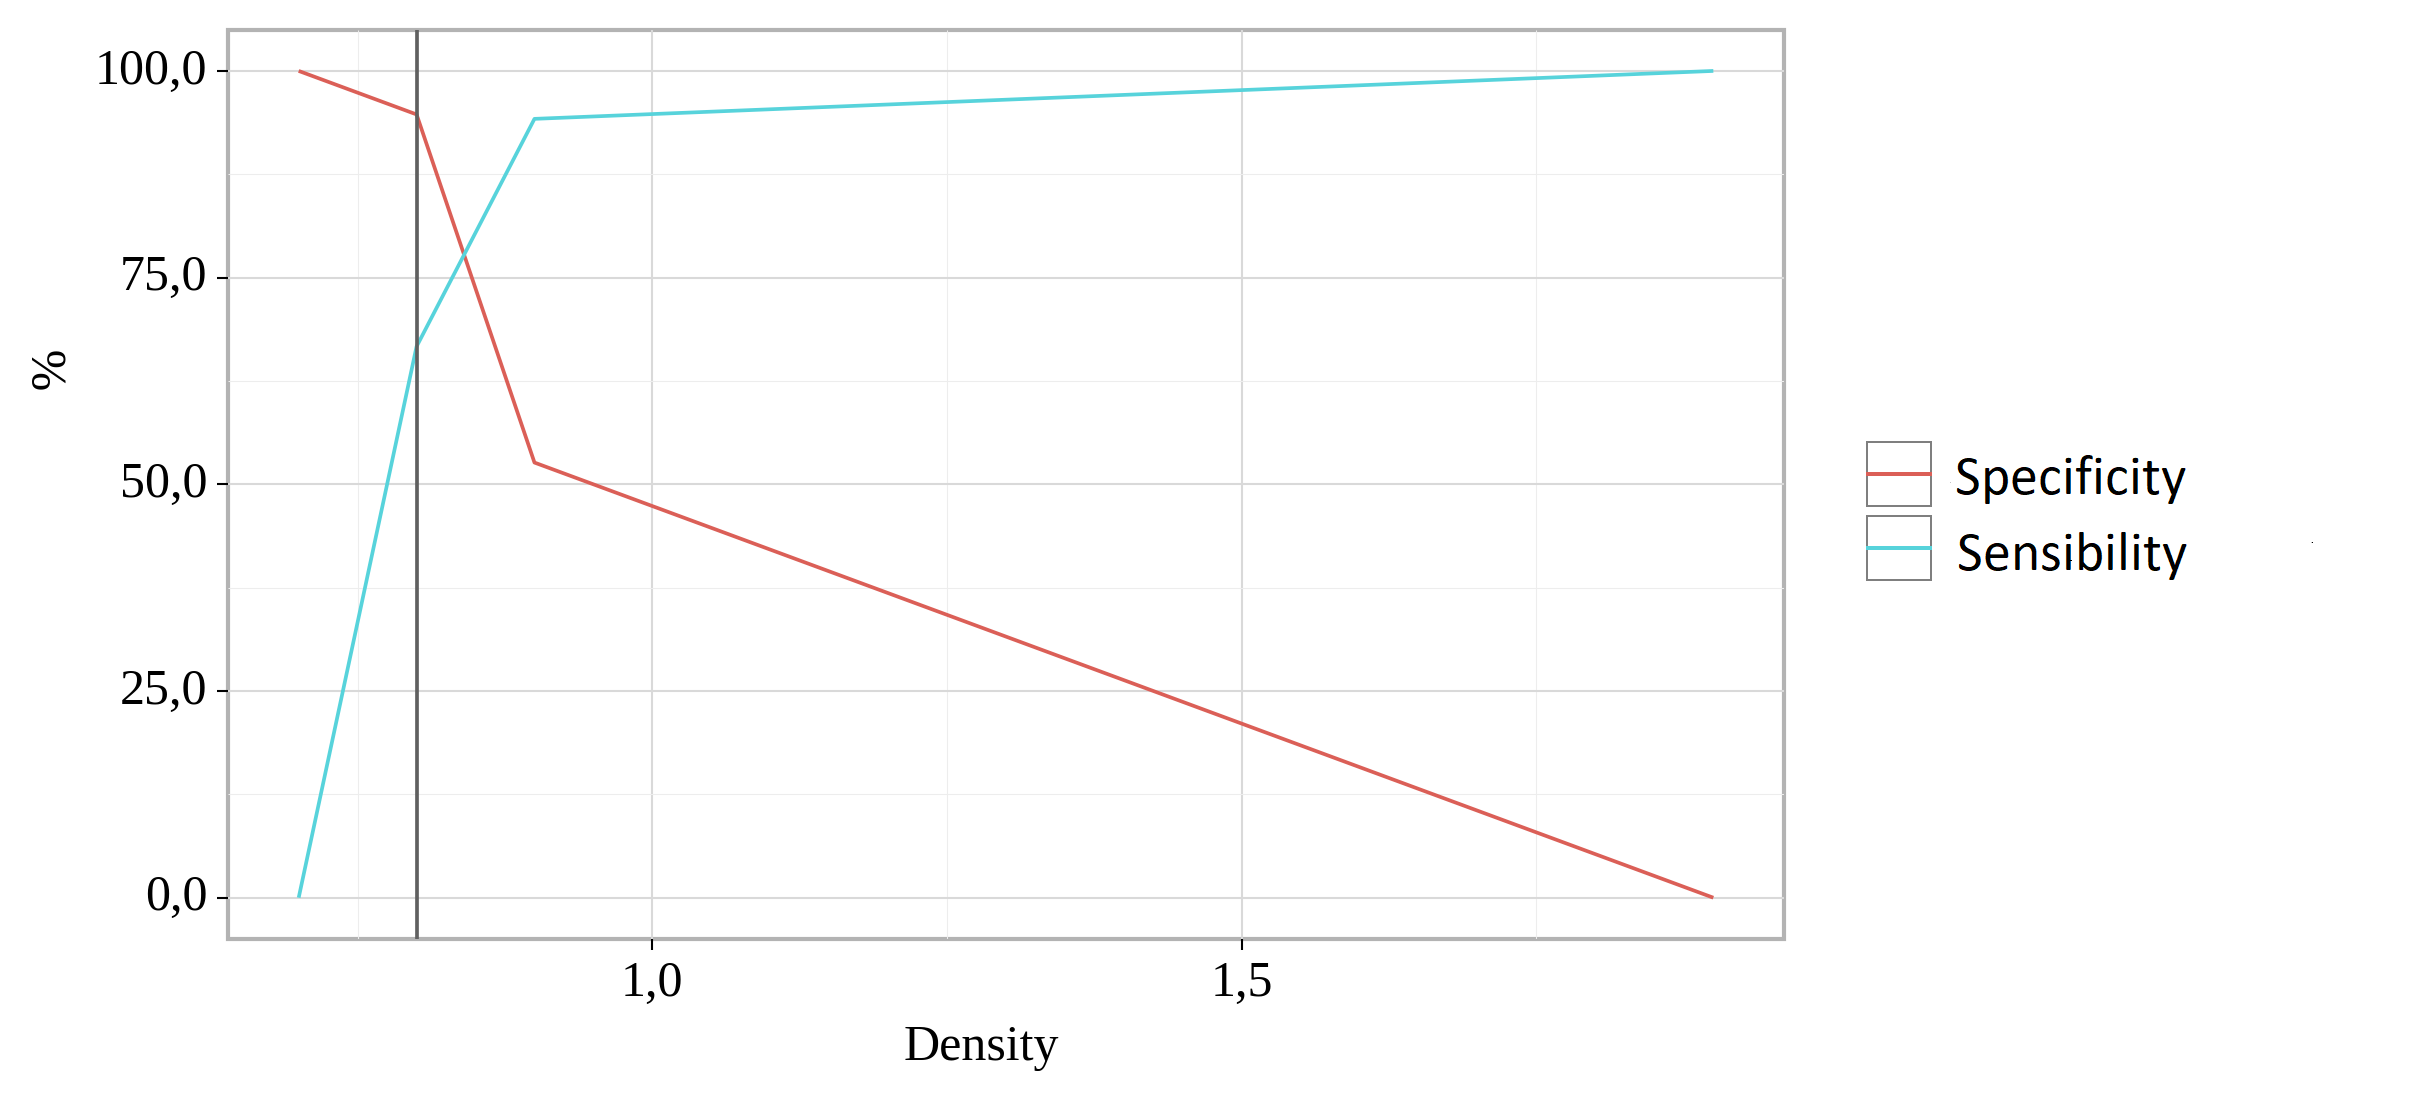 Analysis of the sensibility and specificity of the model depending on the threshold values of the indicator "Density"